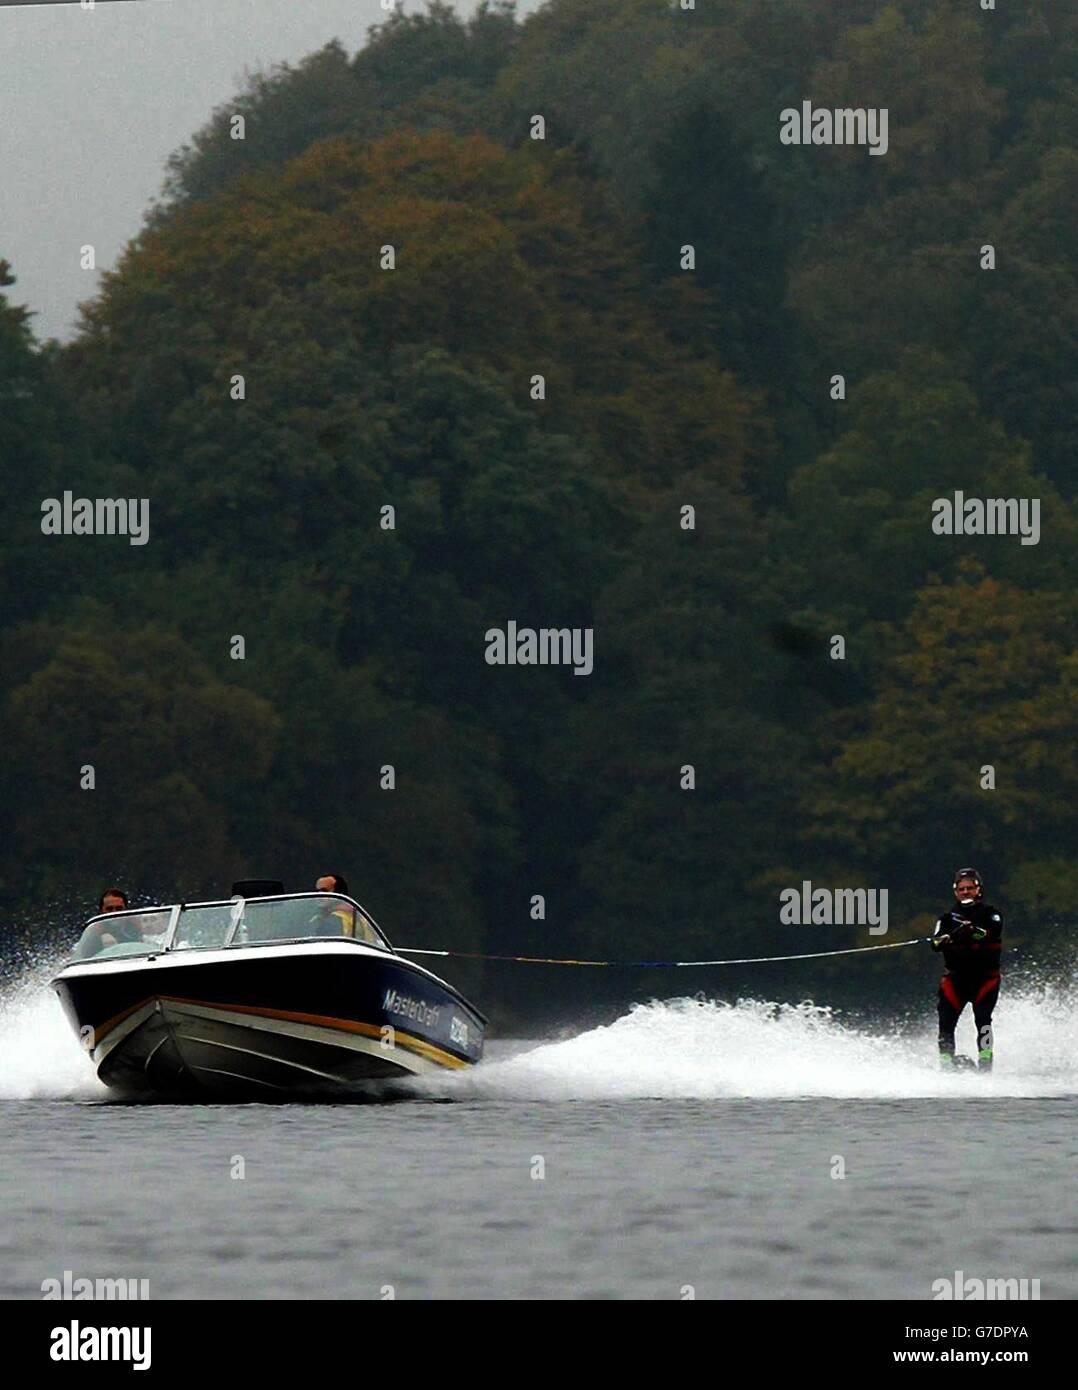 Blind water skier Gerald Price, 71, is pulled through the water by blind speed boat driver Mark Threadgold as Gerald breaks the Blind water ski speed record on Lake Windermere, Cumbria during the annual Windermere Records Week. Stock Photo